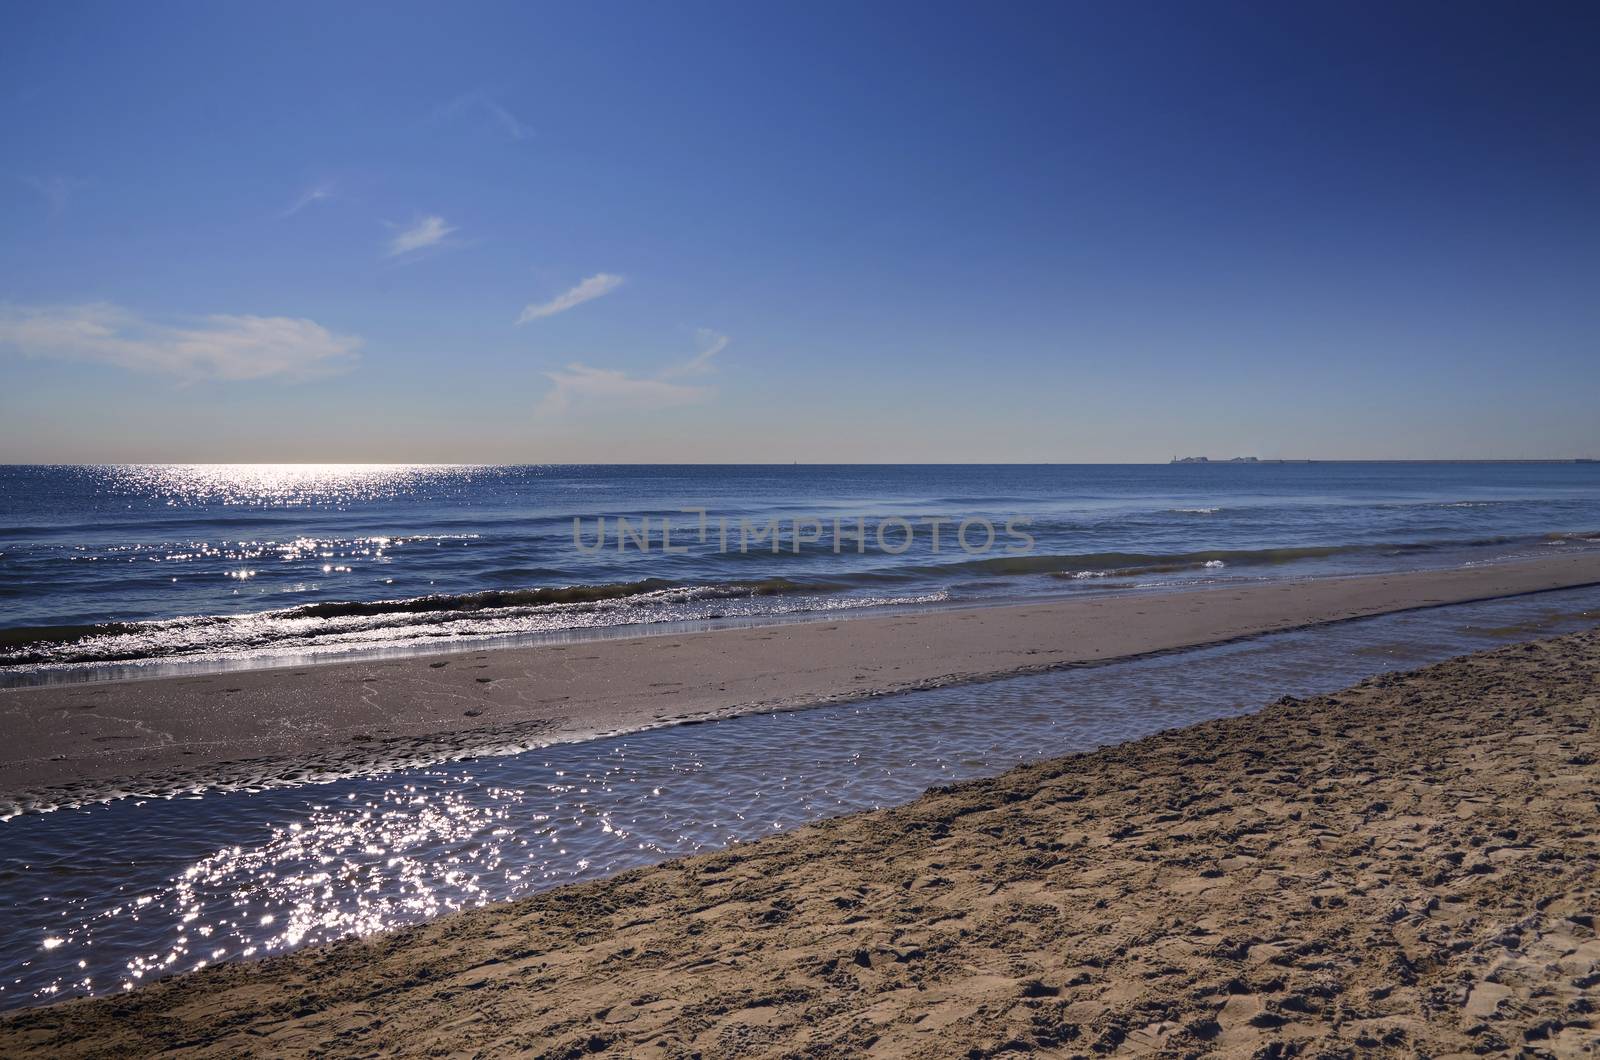 Seascape of one of the most emblematic beaches of Valencia, Spain